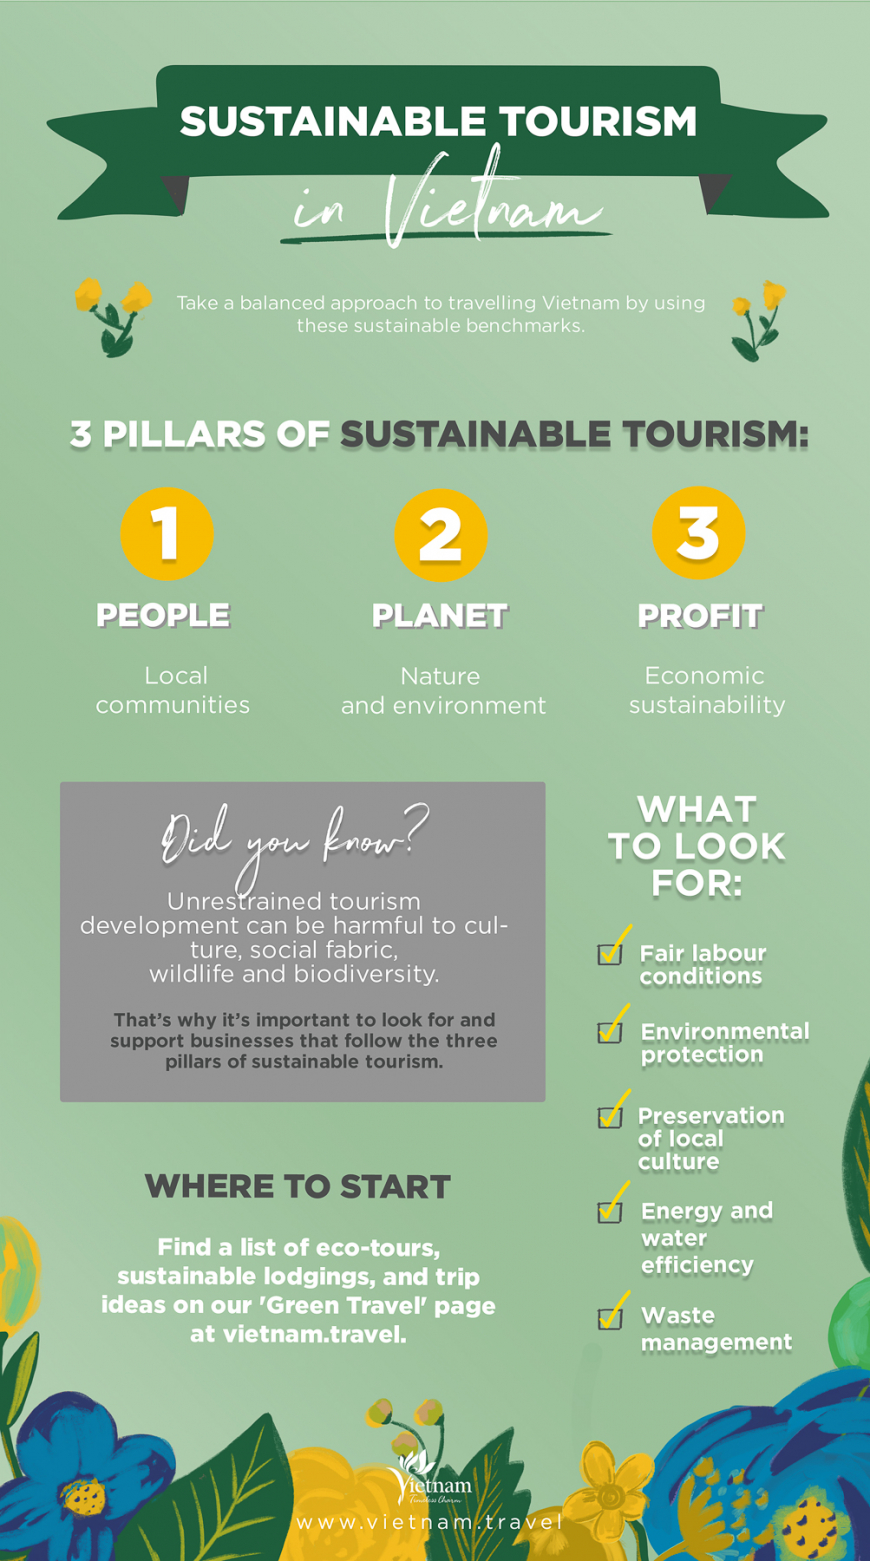 planning for sustainable tourism development